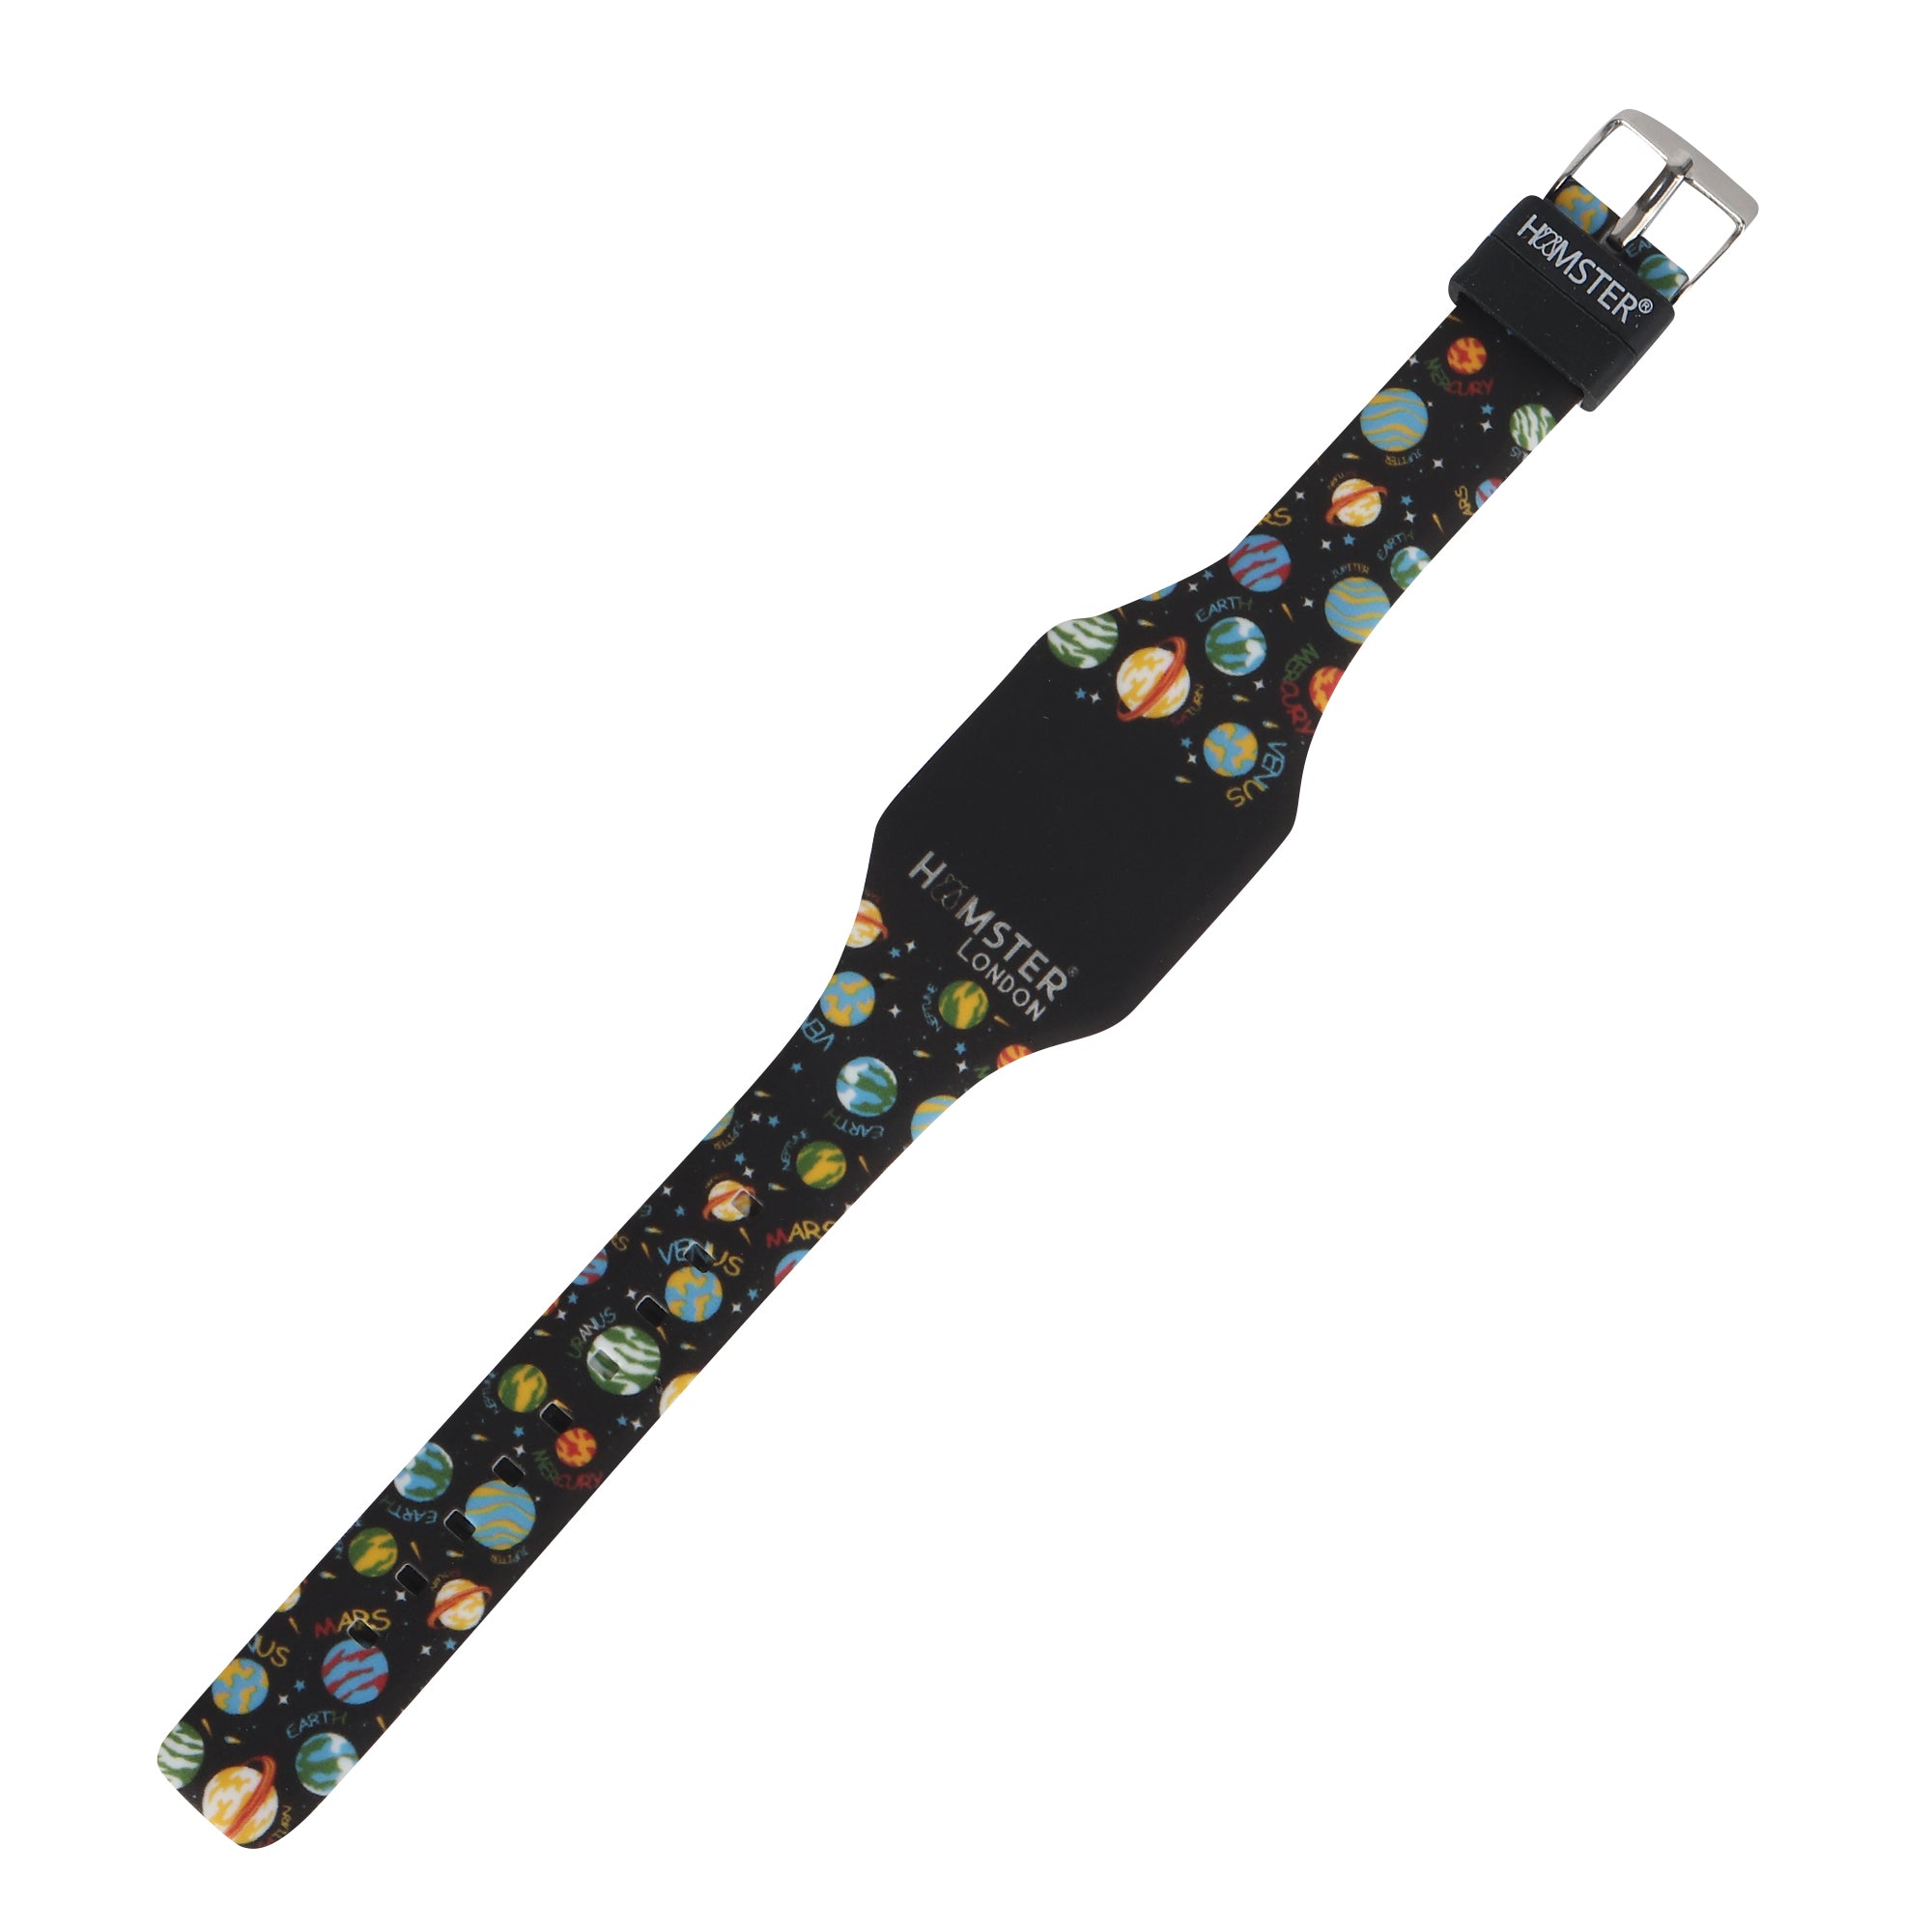 Silicon Digital LED Band Space Black Watch